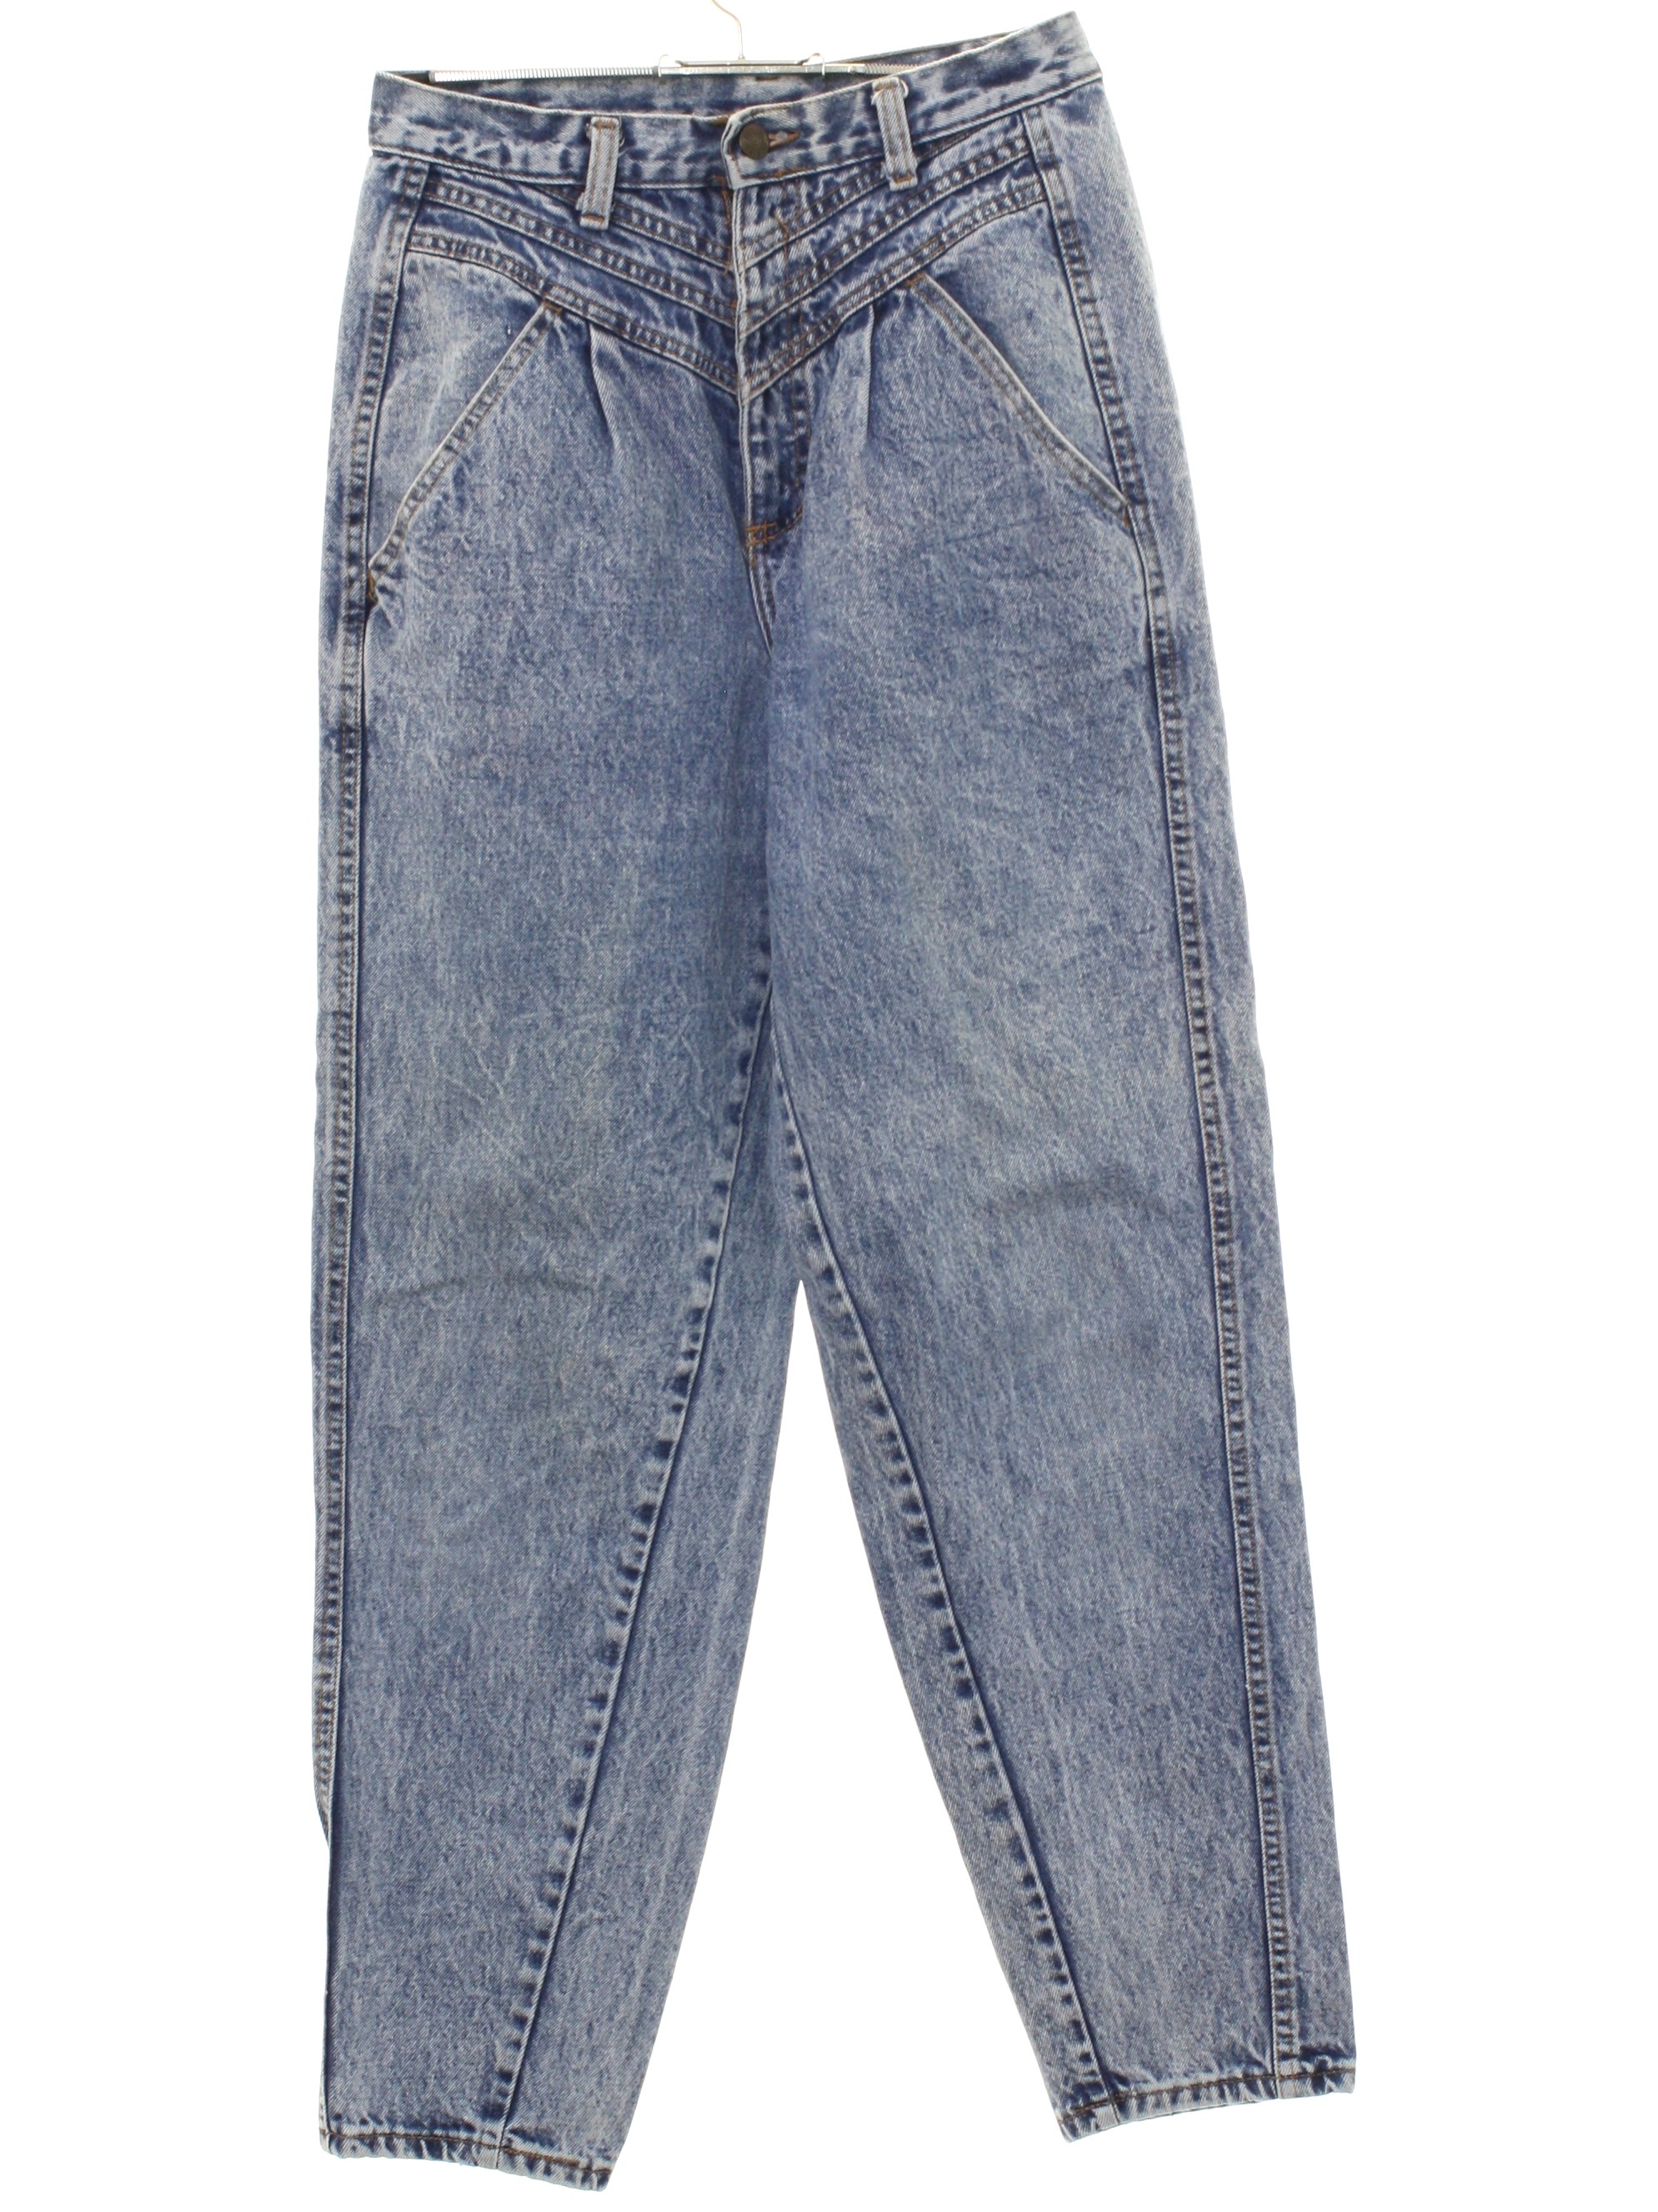 80s Retro Pants: 80s -Zena USA- Womens acid wash blue cotton denim high  waisted totally 80s tapered leg baggy fit jeans pants with diagonal side  entry front pockets, no back pockets. Slightly